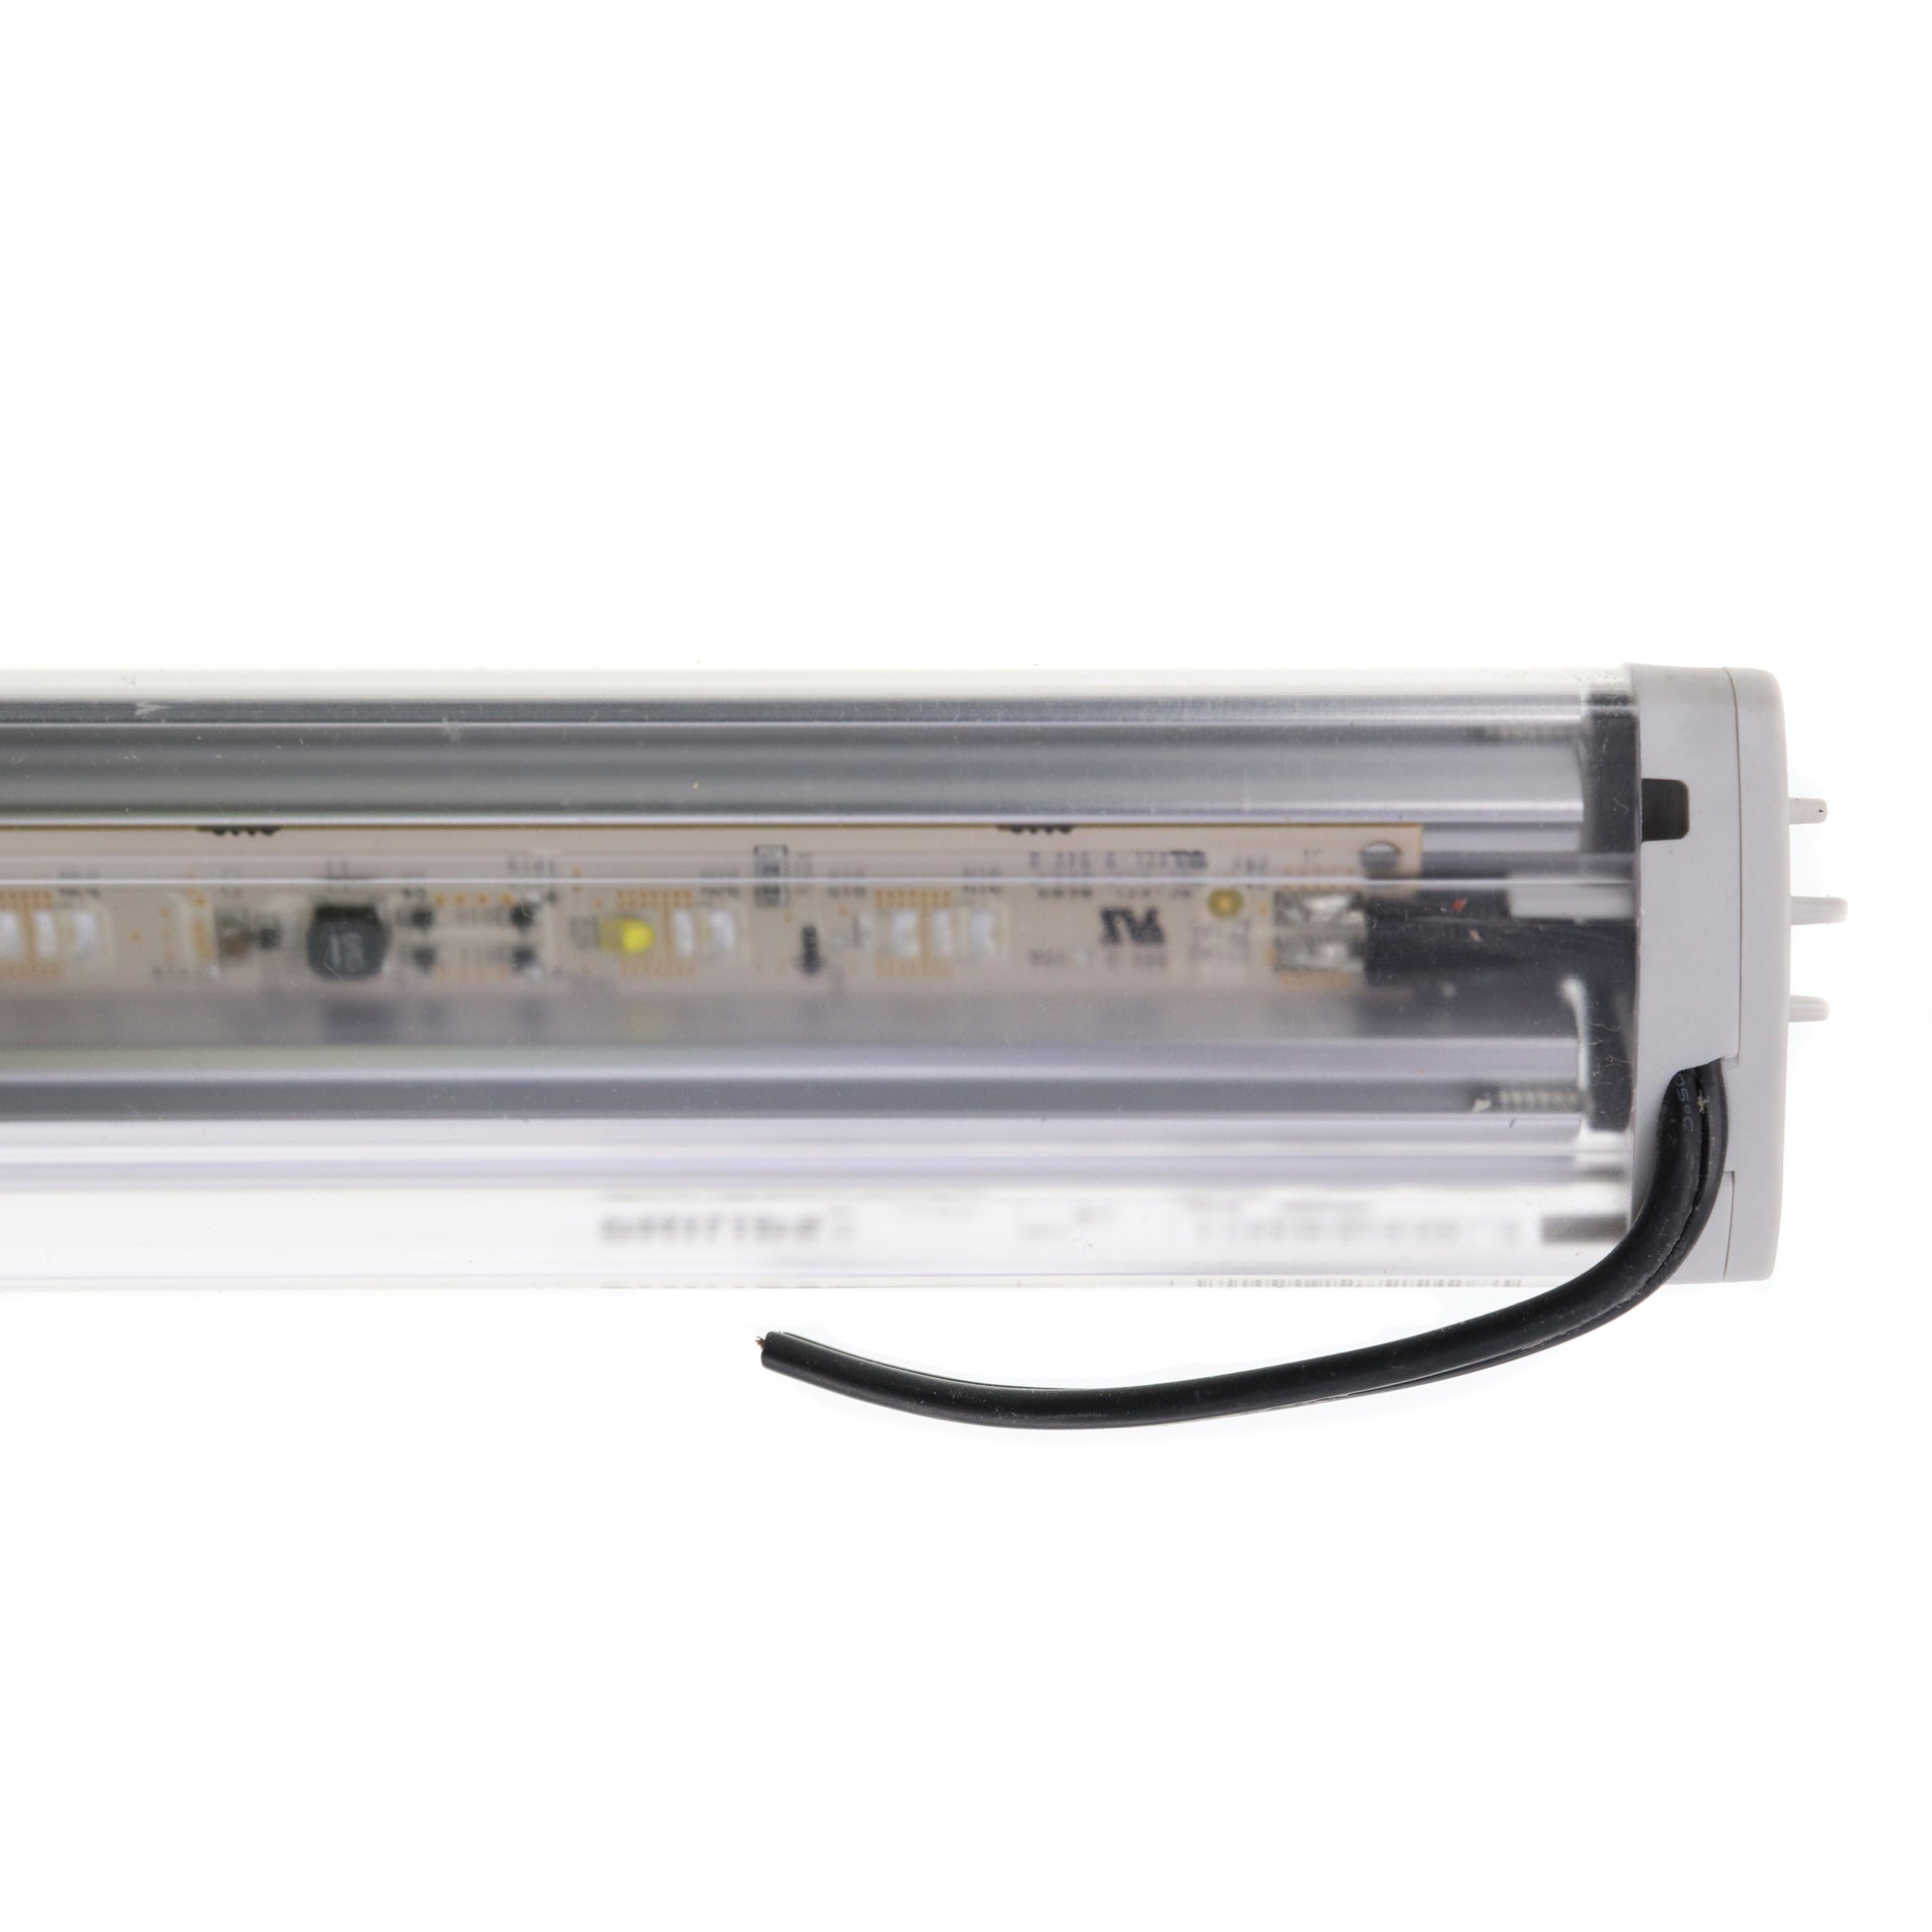 LCM-310-1200MM VISION-PLUS CABINET LINEAR LED LIGHT, NW – Toomanyamps